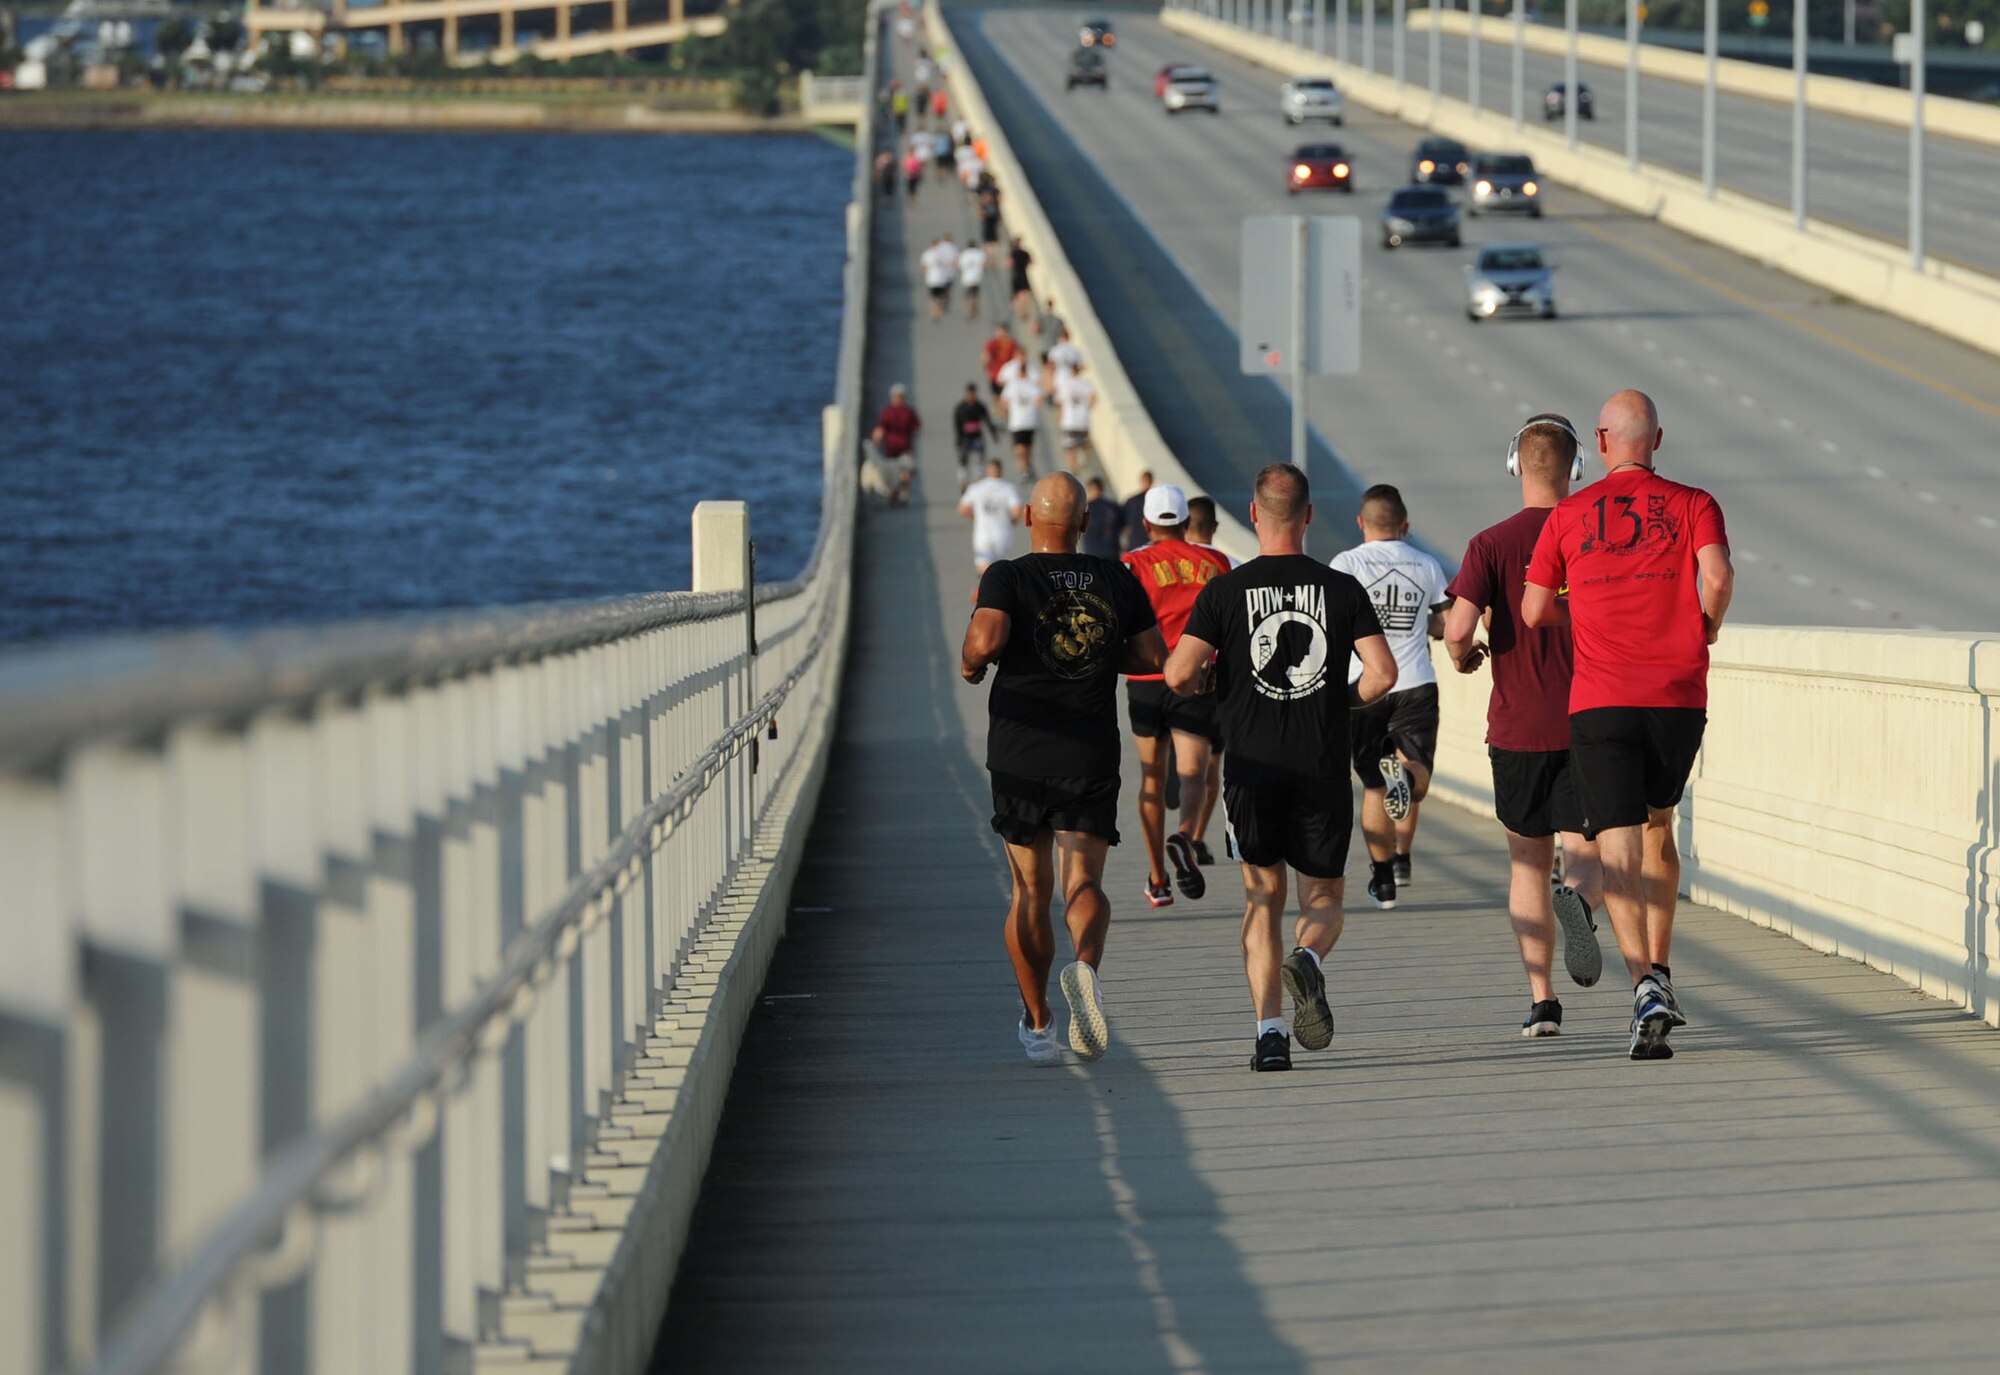 Members of the Keesler Air Force Base Marine Detachment participate in a 3.7 mile remembrance run across the Ocean Springs/Biloxi Bridge Sept. 9, 2017, in Mississippi. The event honored those who lost their lives during the 9/11 attacks. (U.S. Air Force photo by Kemberly Groue)